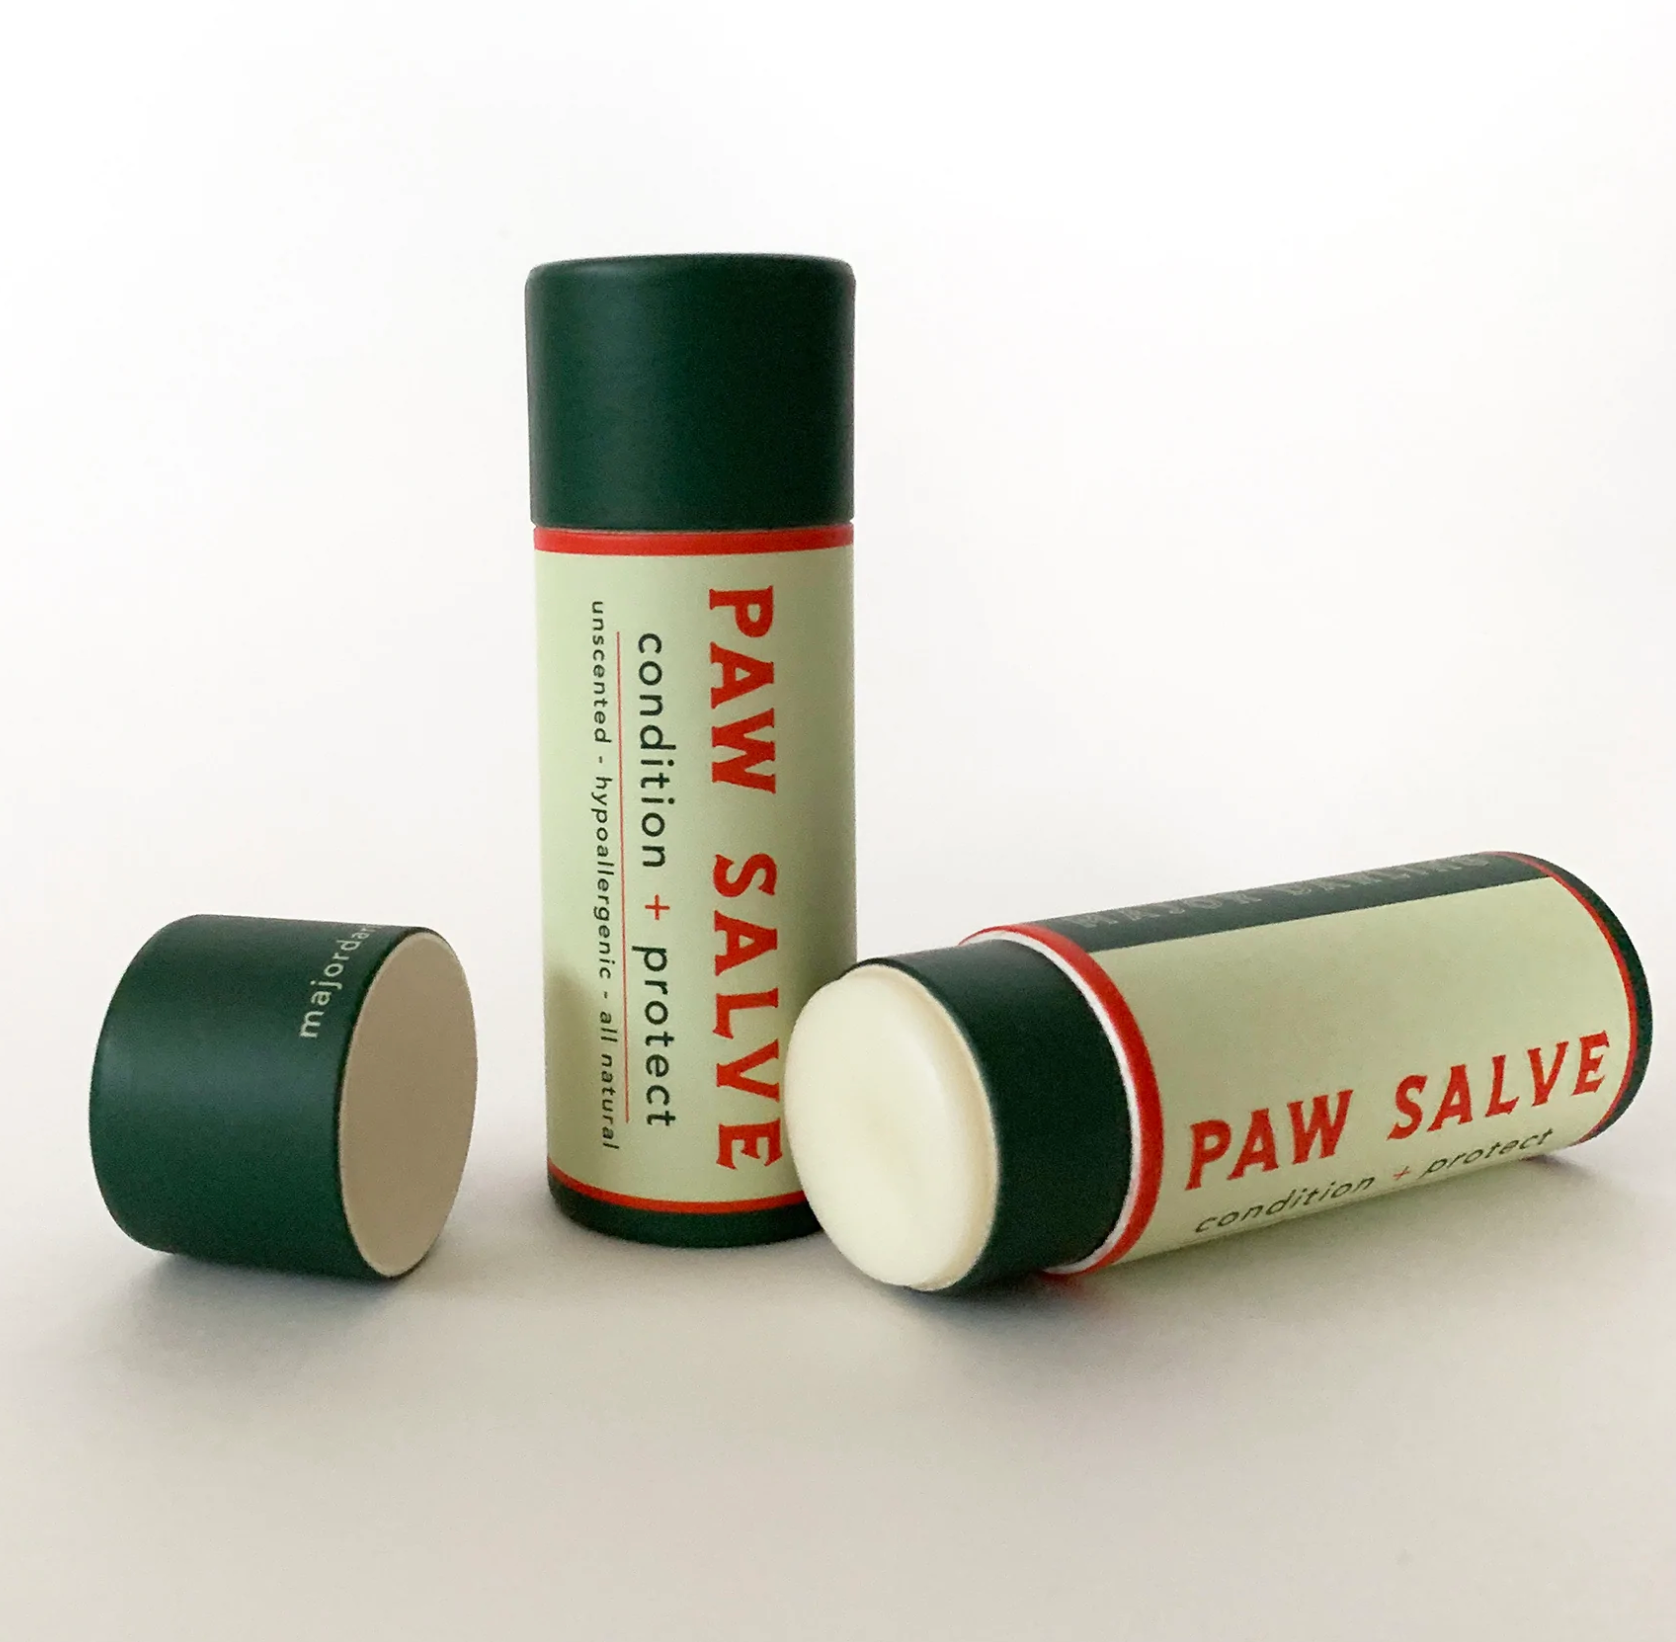 Paw Salve easy-on application stick